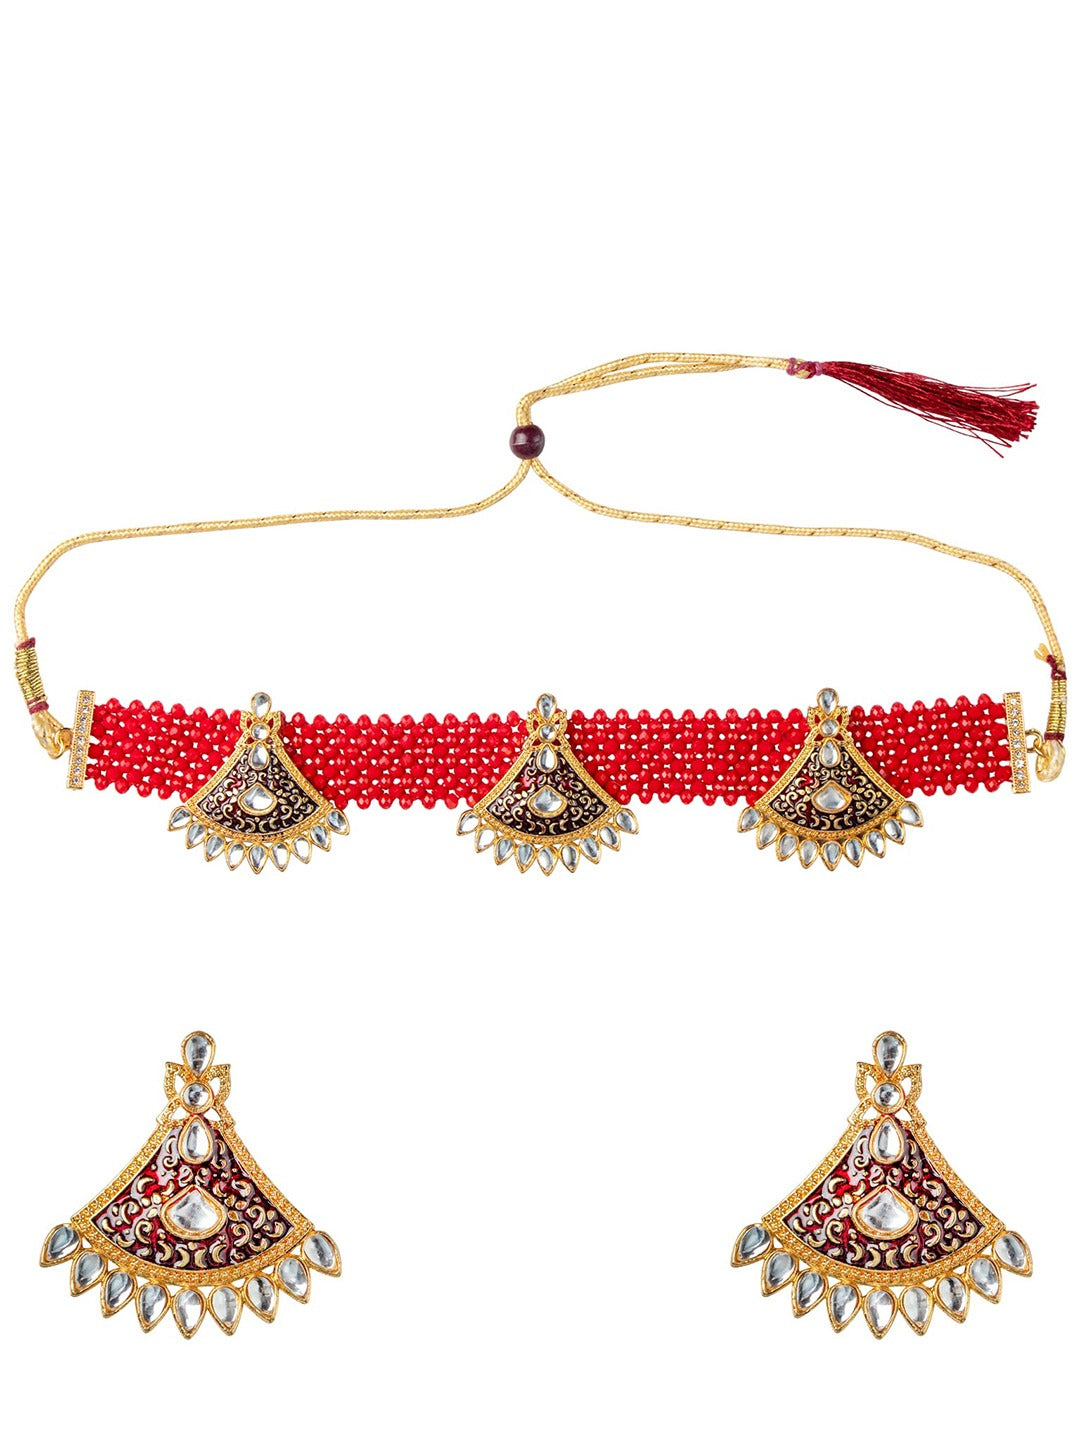 Women's Gold-Plated Red & White Stone-Studded & Pearl Beaded Jewellery Set - Morkanth